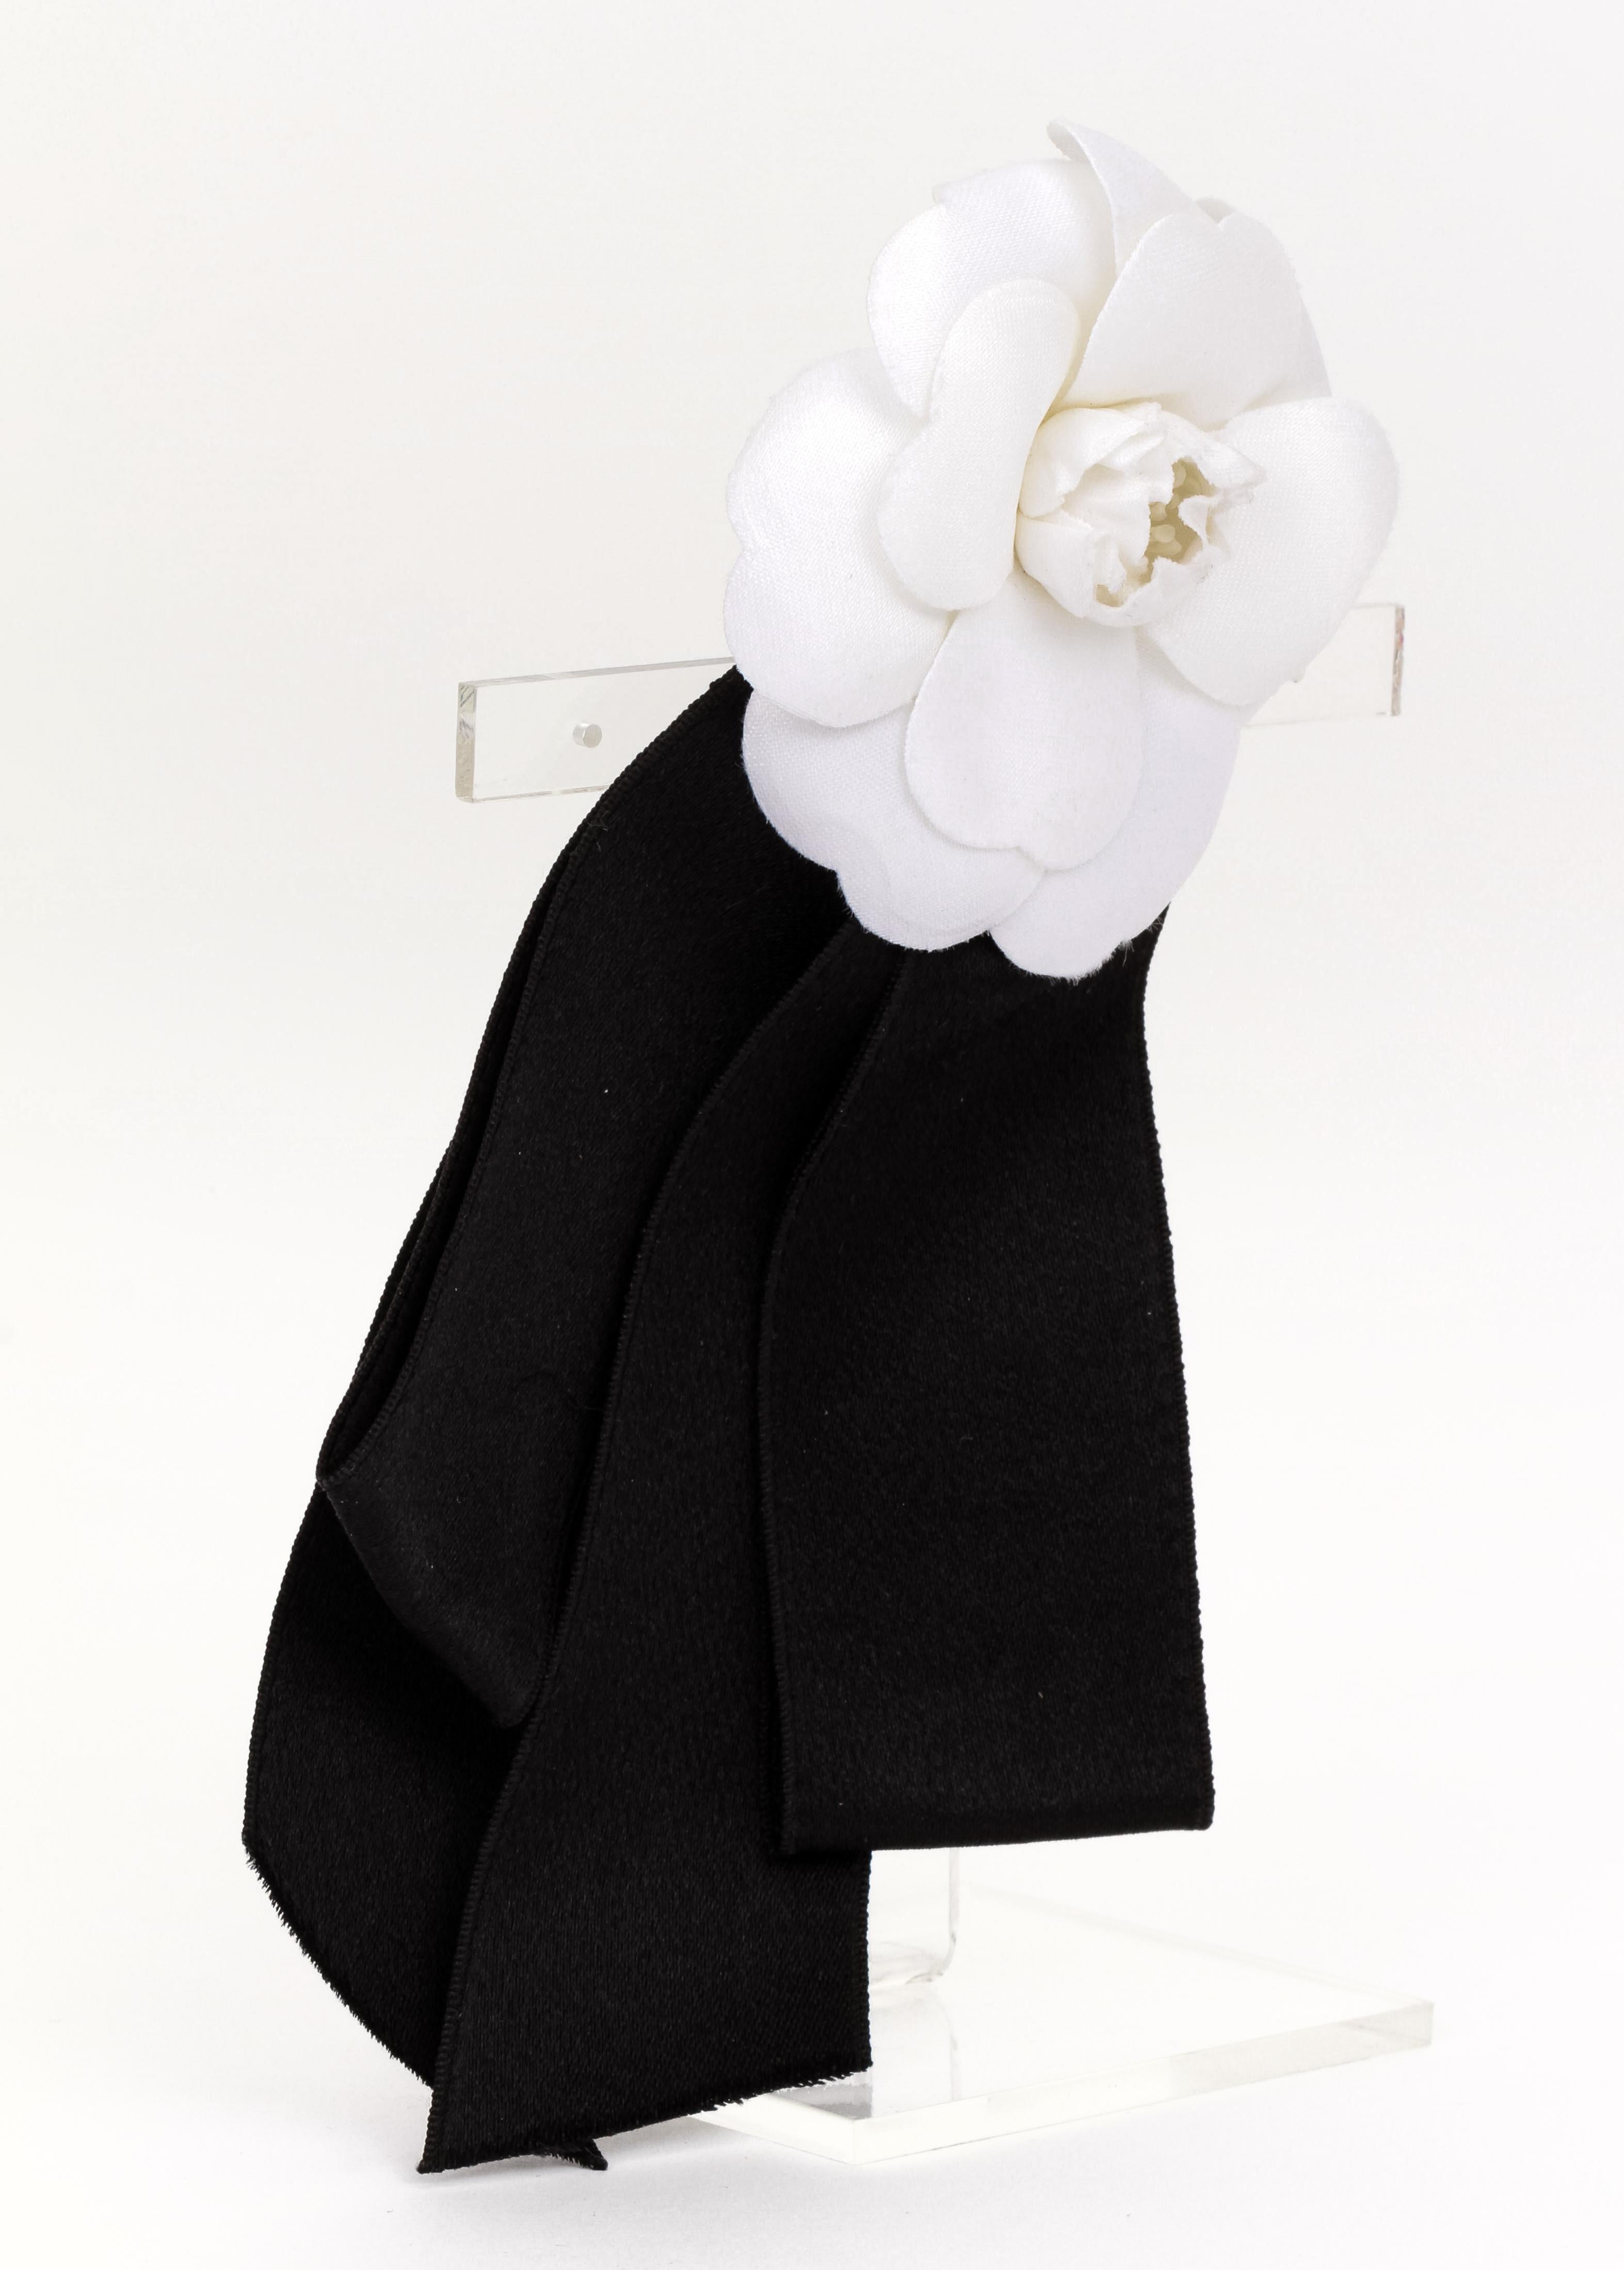 Chanel large white fabric camellia brooch with black silk bow attached. Comes with velvet pouch.